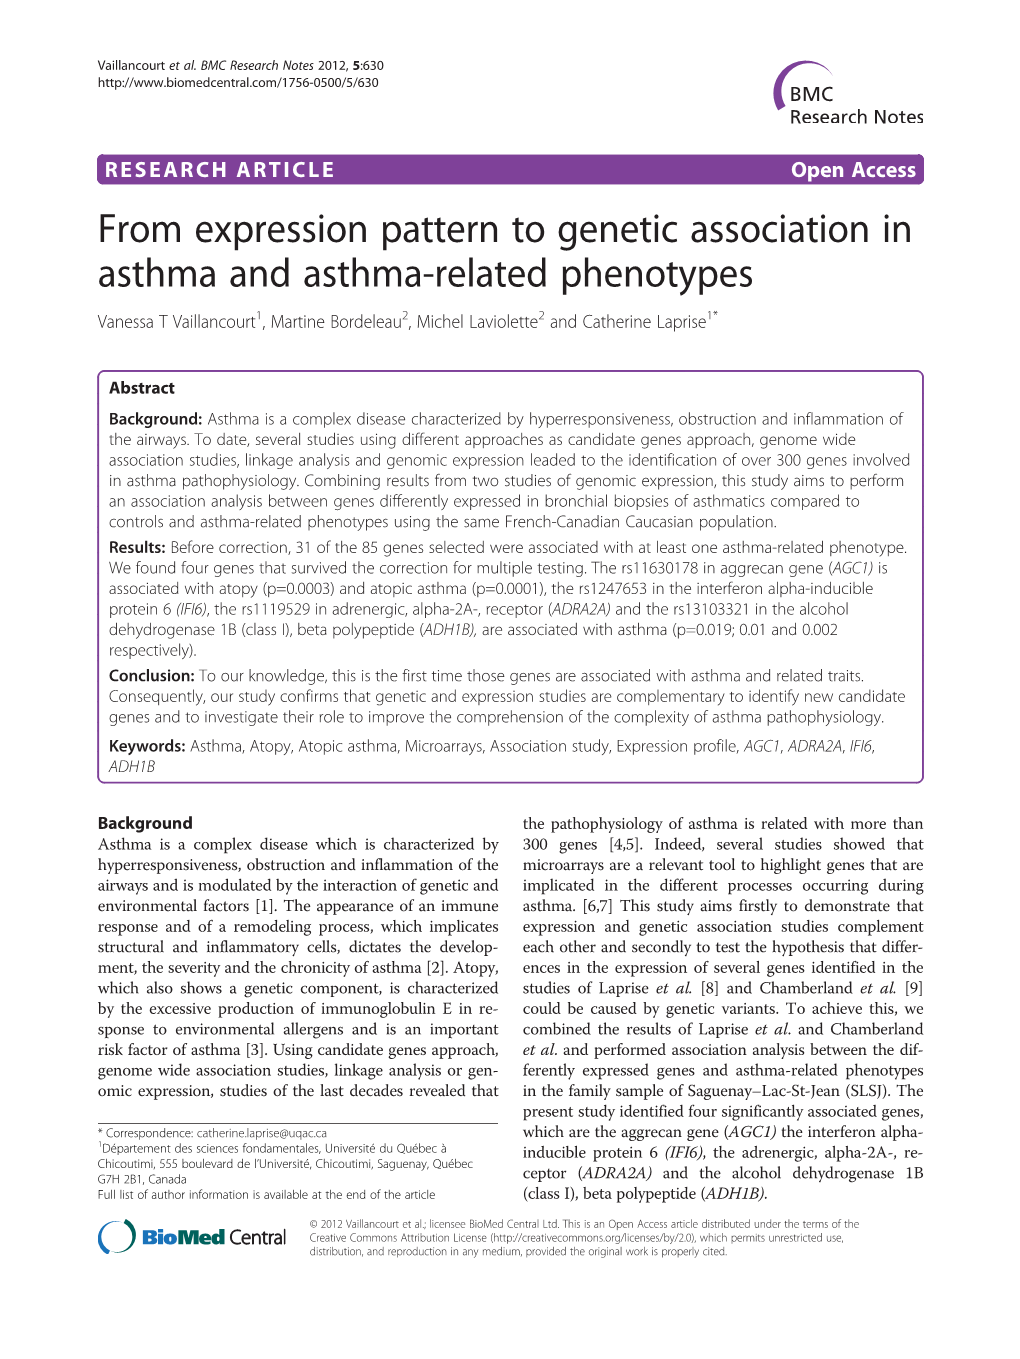 From Expression Pattern to Genetic Association in Asthma Related